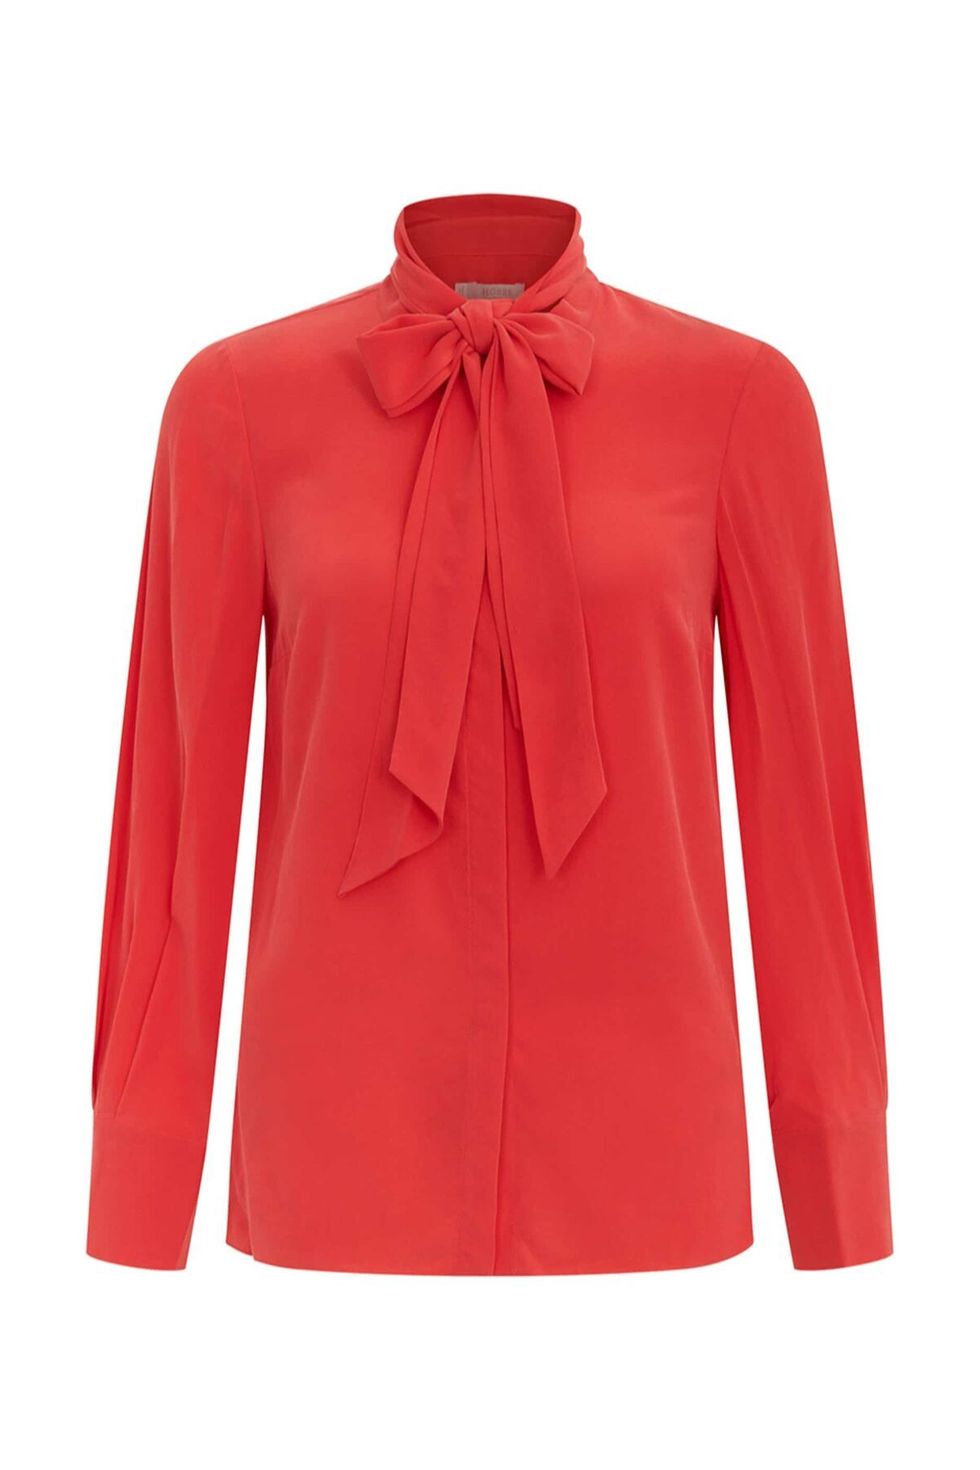 Red Bow Blouse, £159